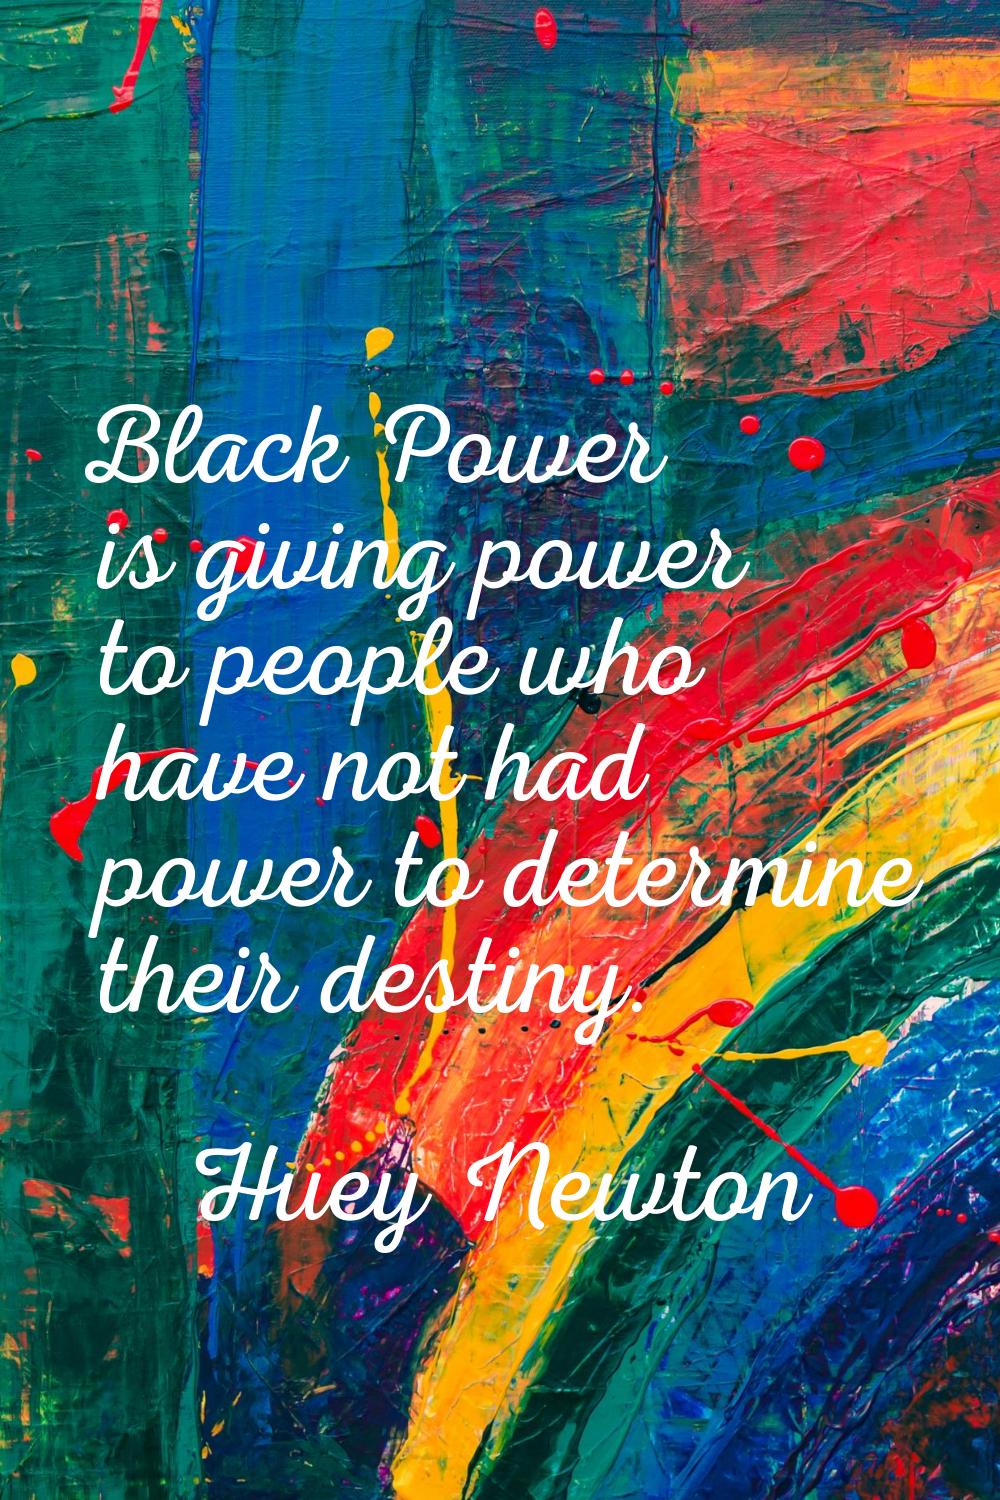 Black Power is giving power to people who have not had power to determine their destiny.